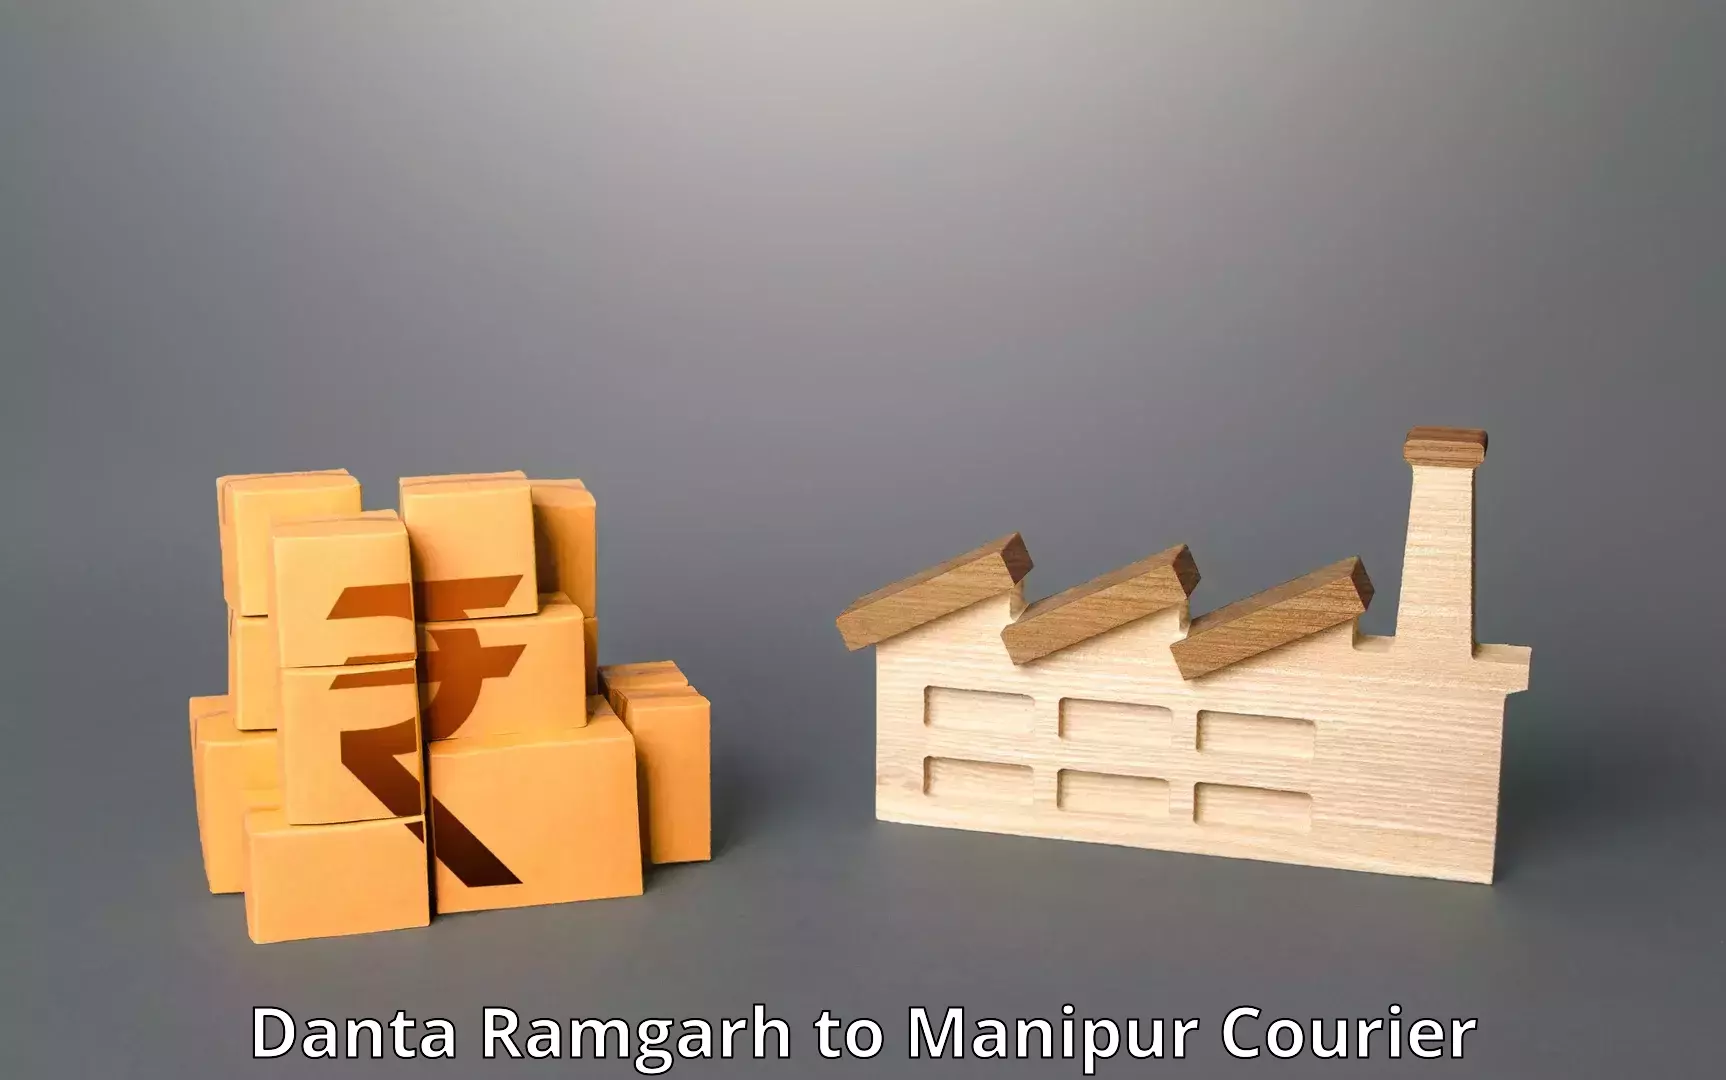 Urgent courier needs Danta Ramgarh to Imphal